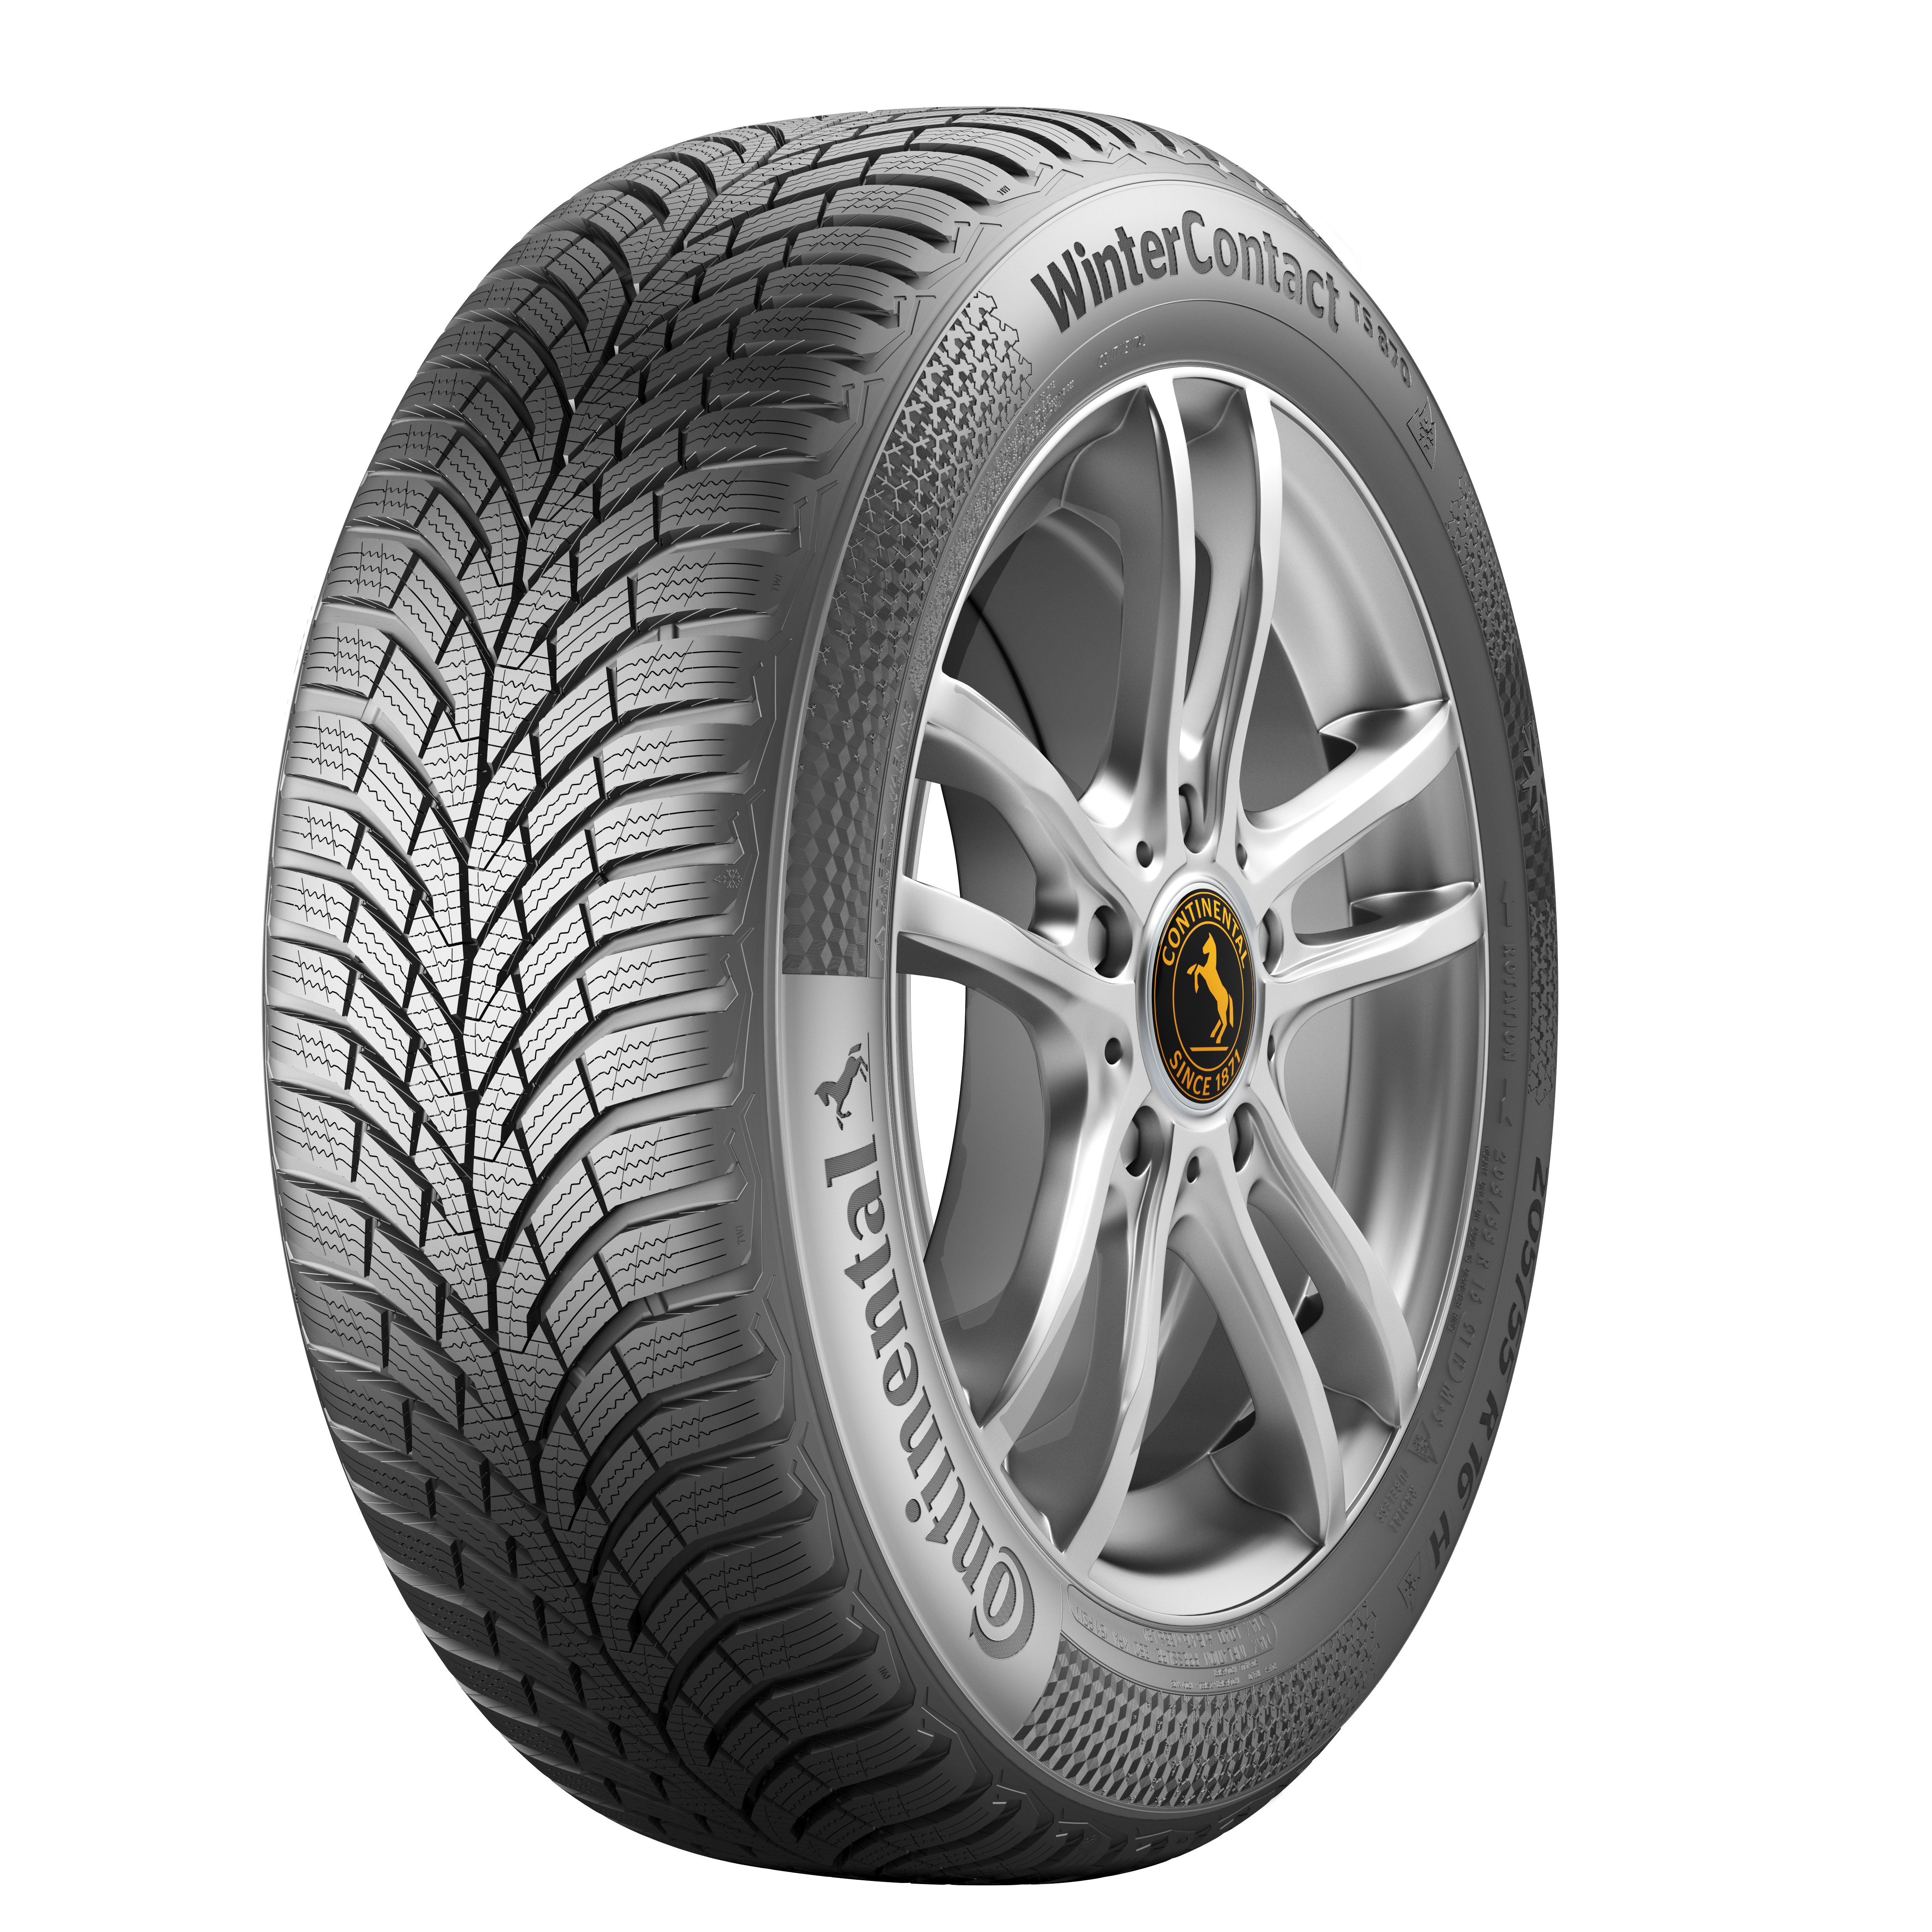 Top Continental ADAC Continental in with Tire Test AG 2023 Rating Winter -